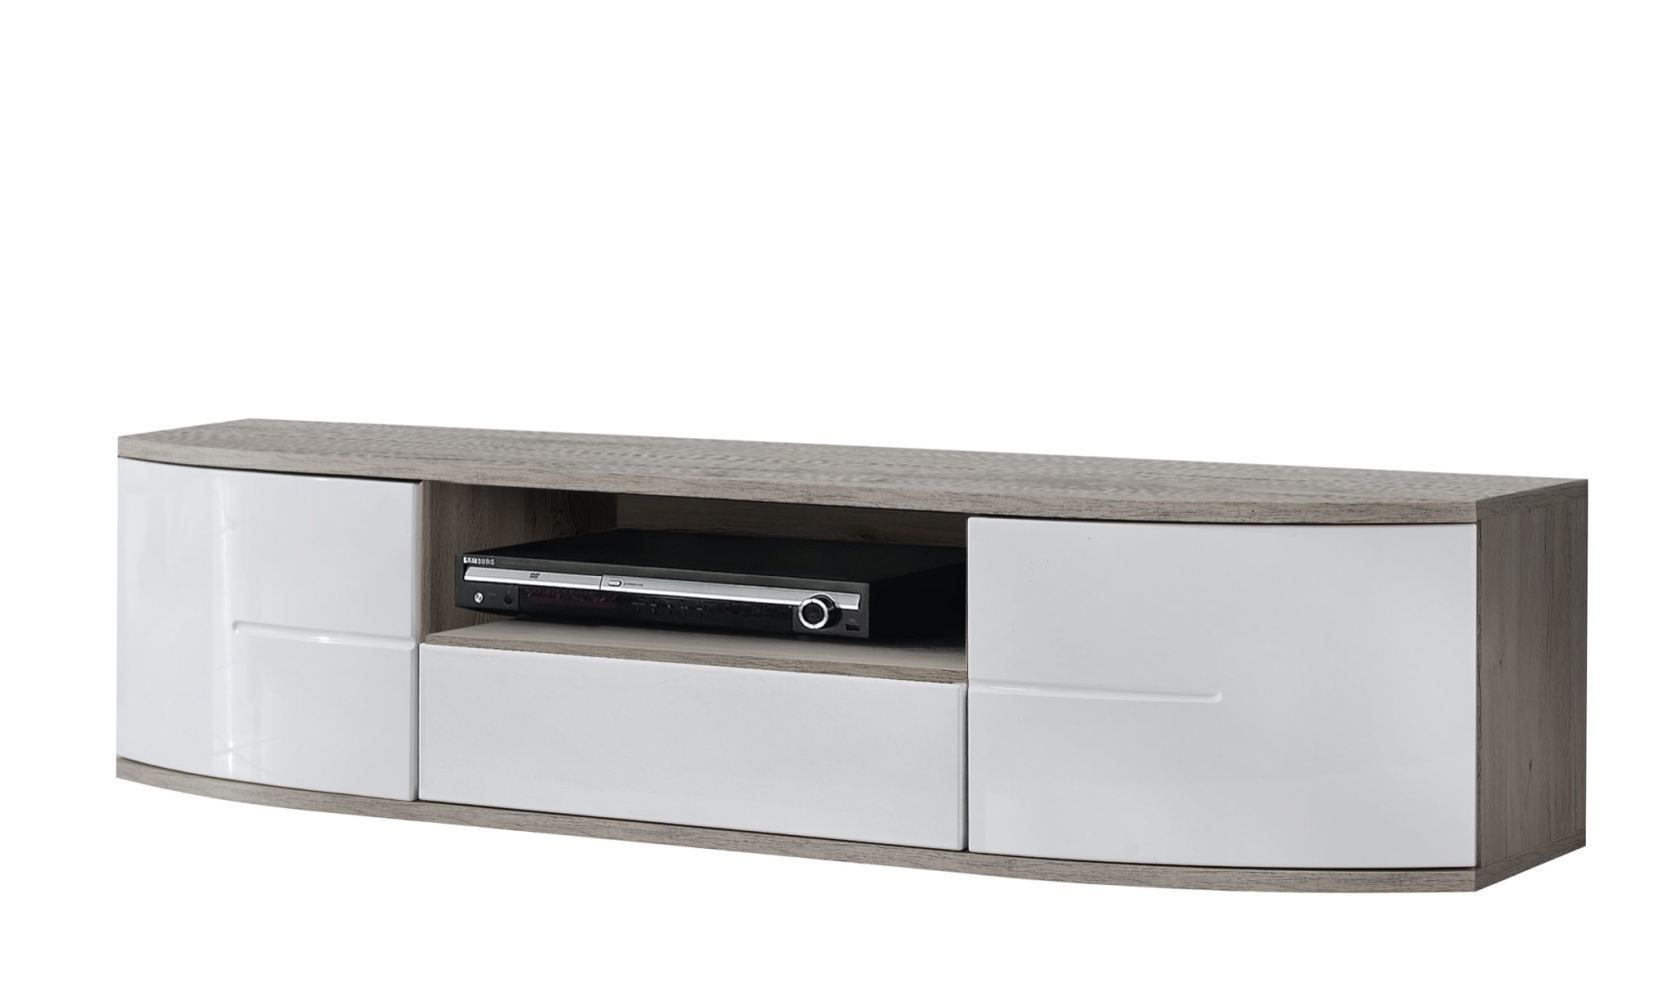 TV cabinet with three compartments Nese 05, color: white high gloss / oak San Remo - dimensions: 43 x 150 x 48 cm (H x W x D)